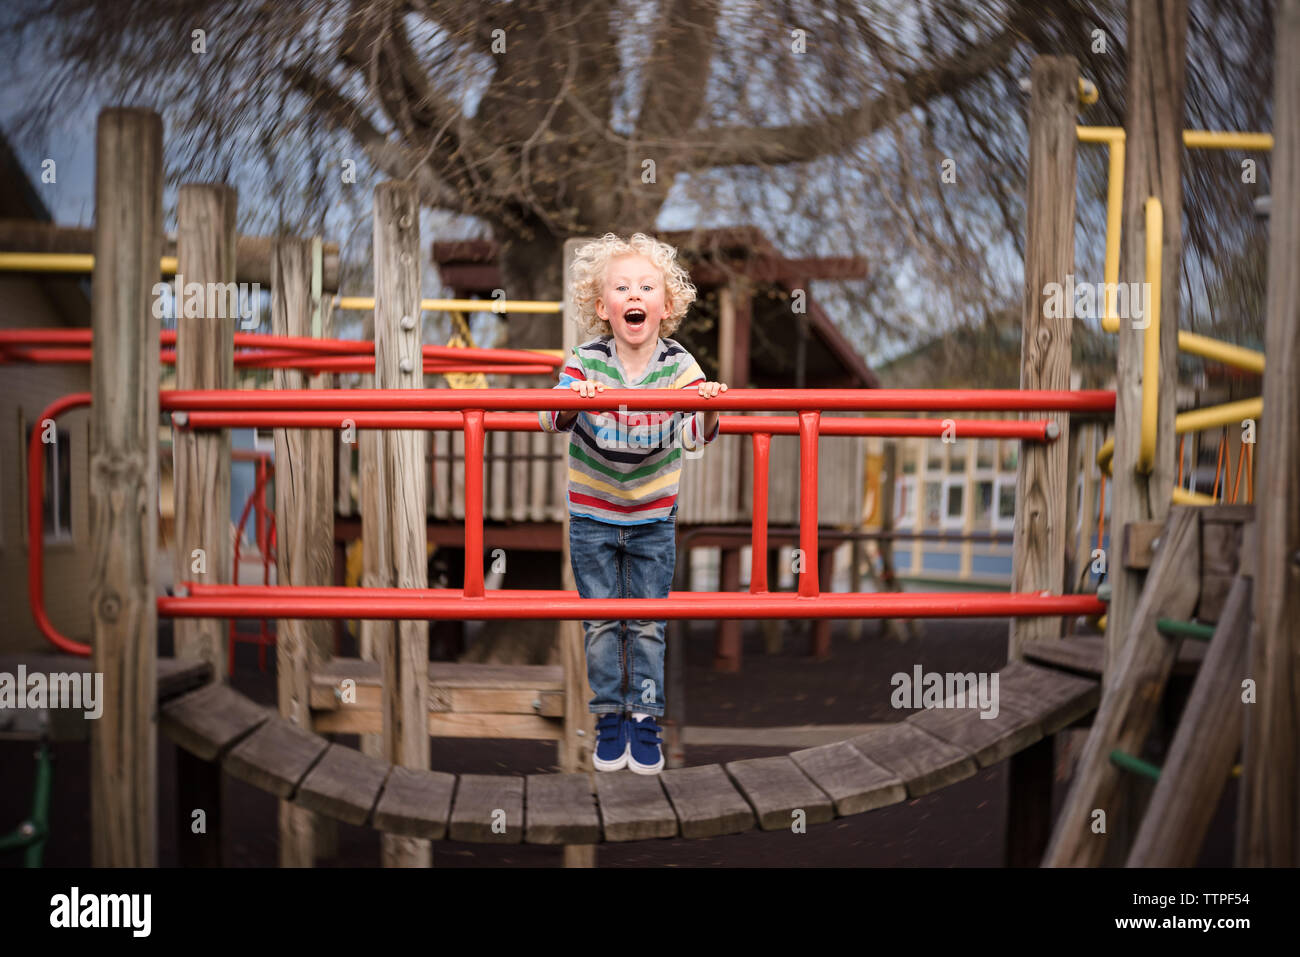 Young boy laughing and playing on playground at a park Stock Photo